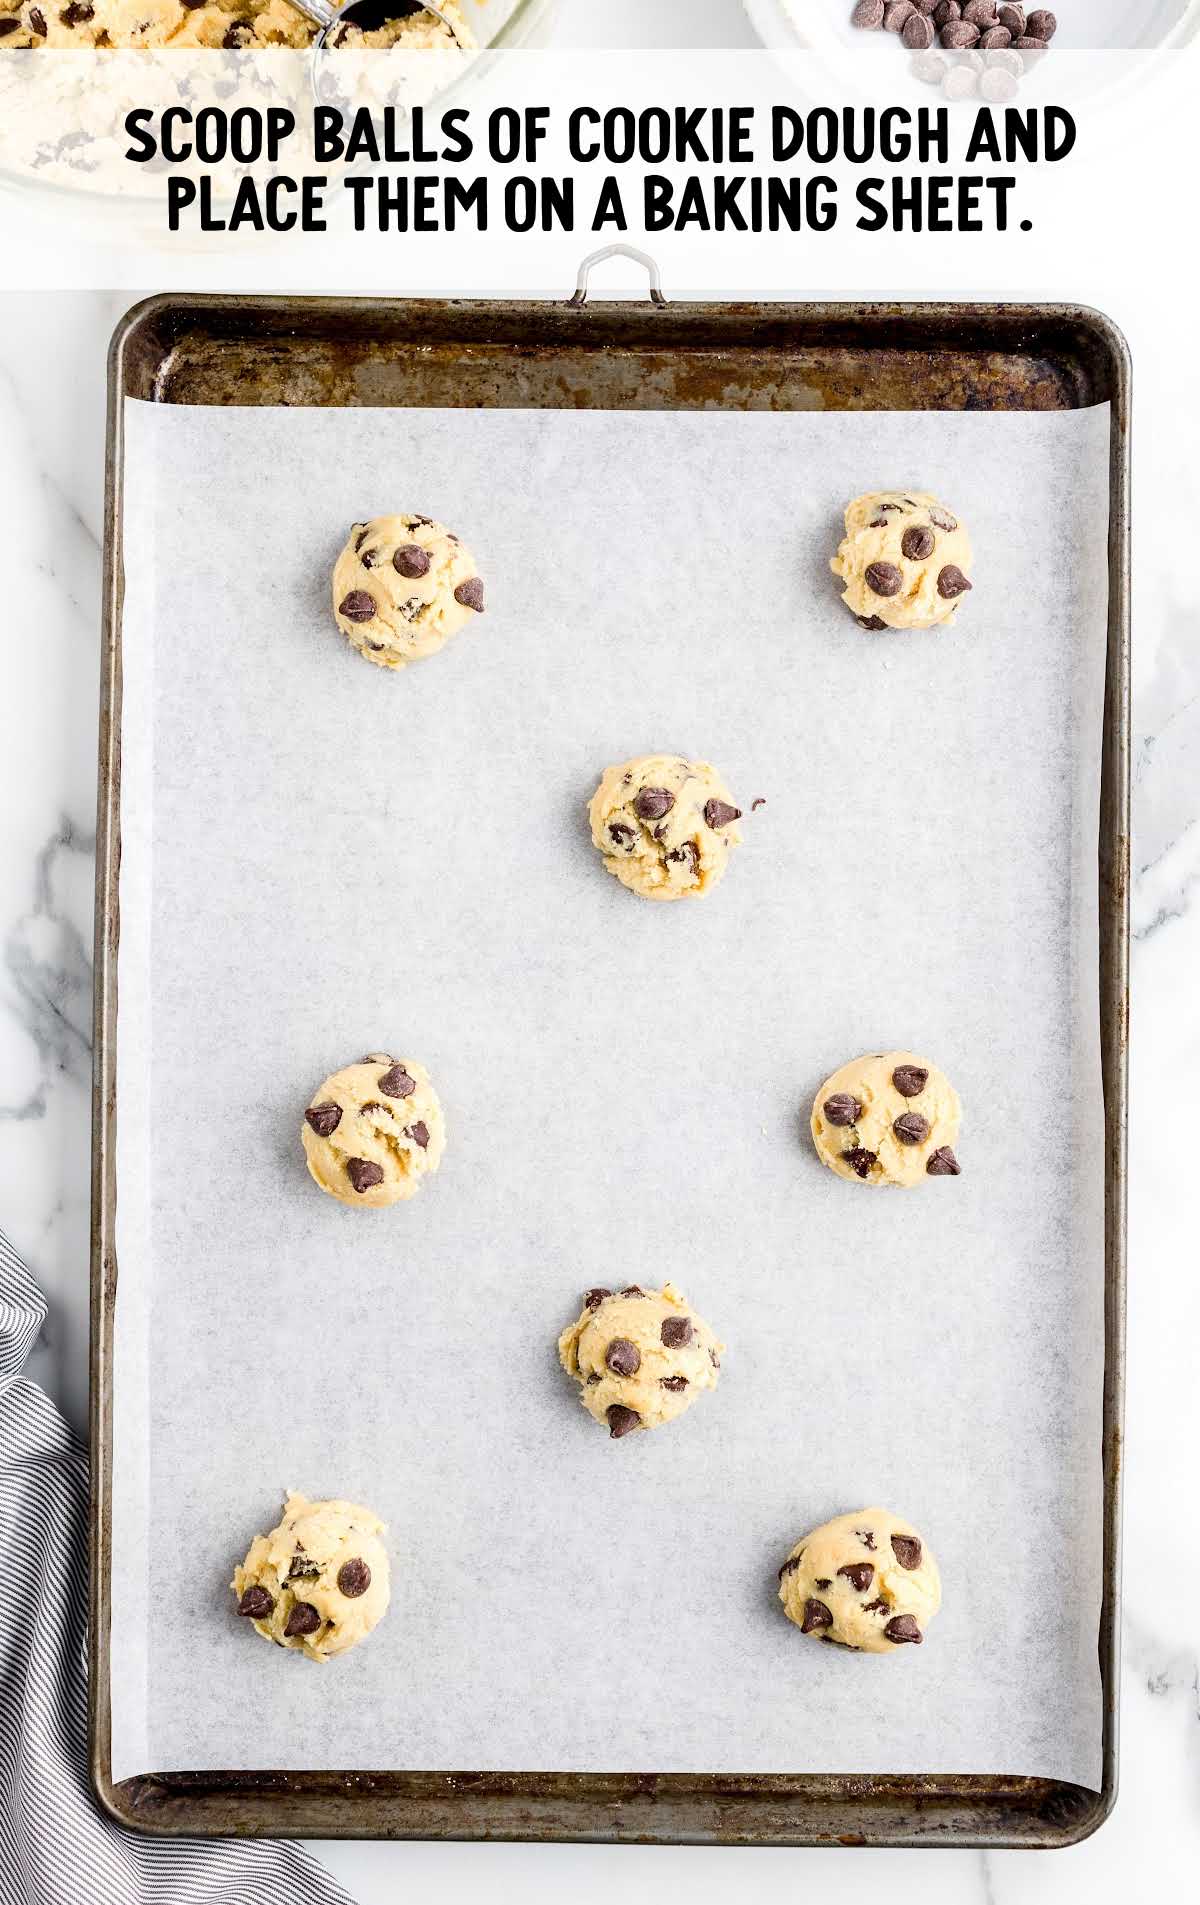 balls of cookie dough placed on a baking sheet